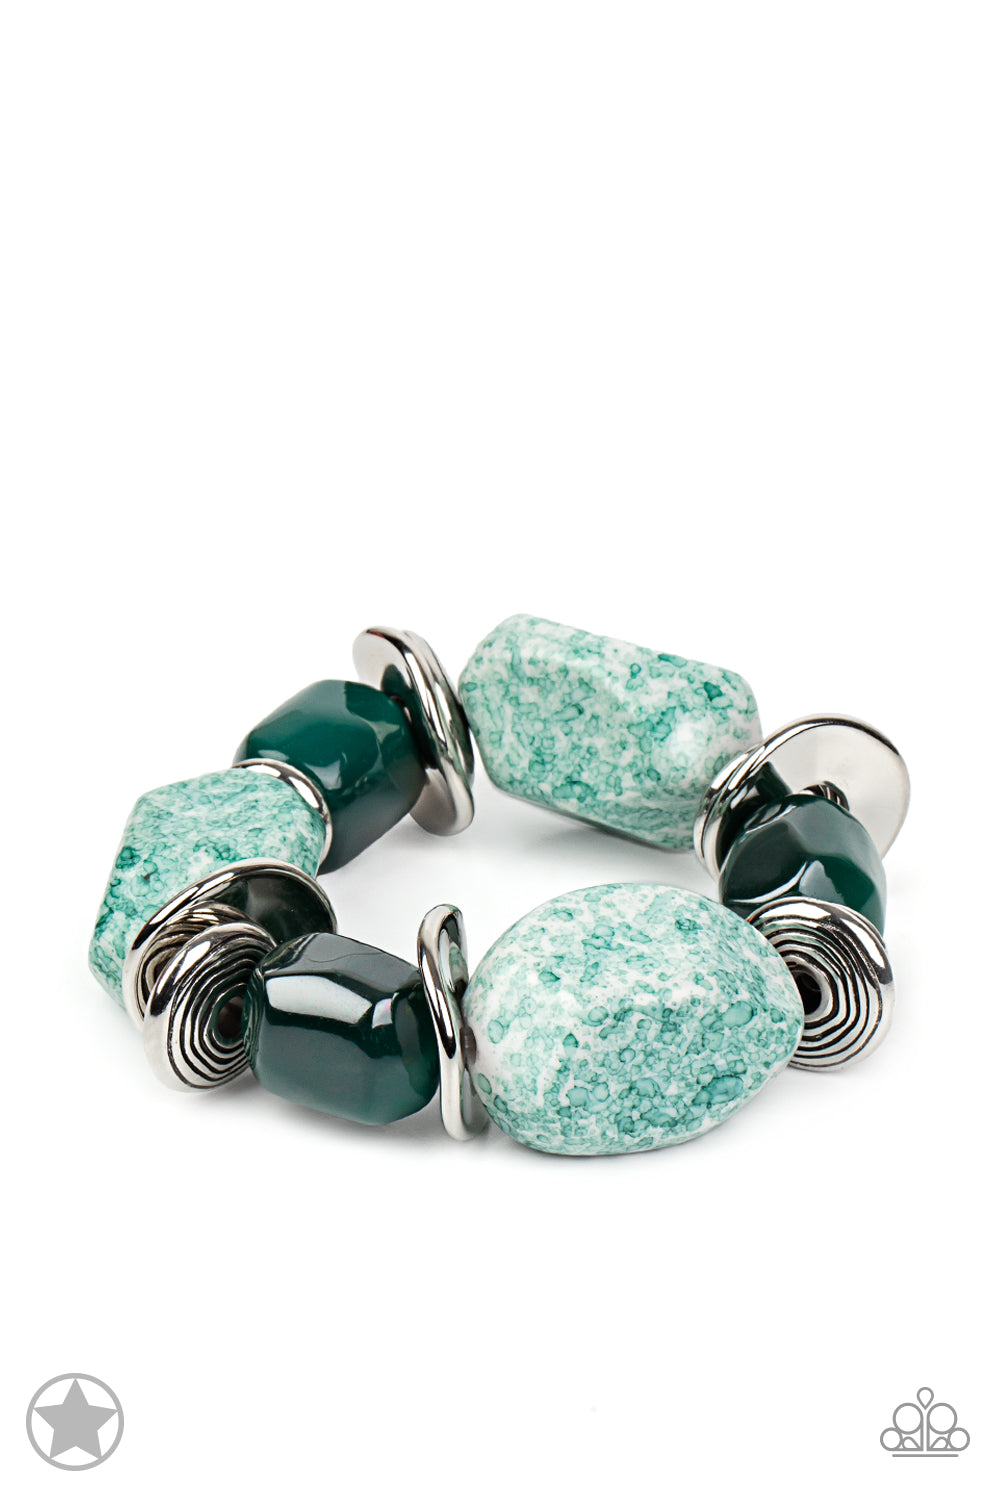 Paparazzi Accessories Glaze Of Glory - Blue Chunky blue beads combine with intricate silver details on a stretchy band. Jewelry